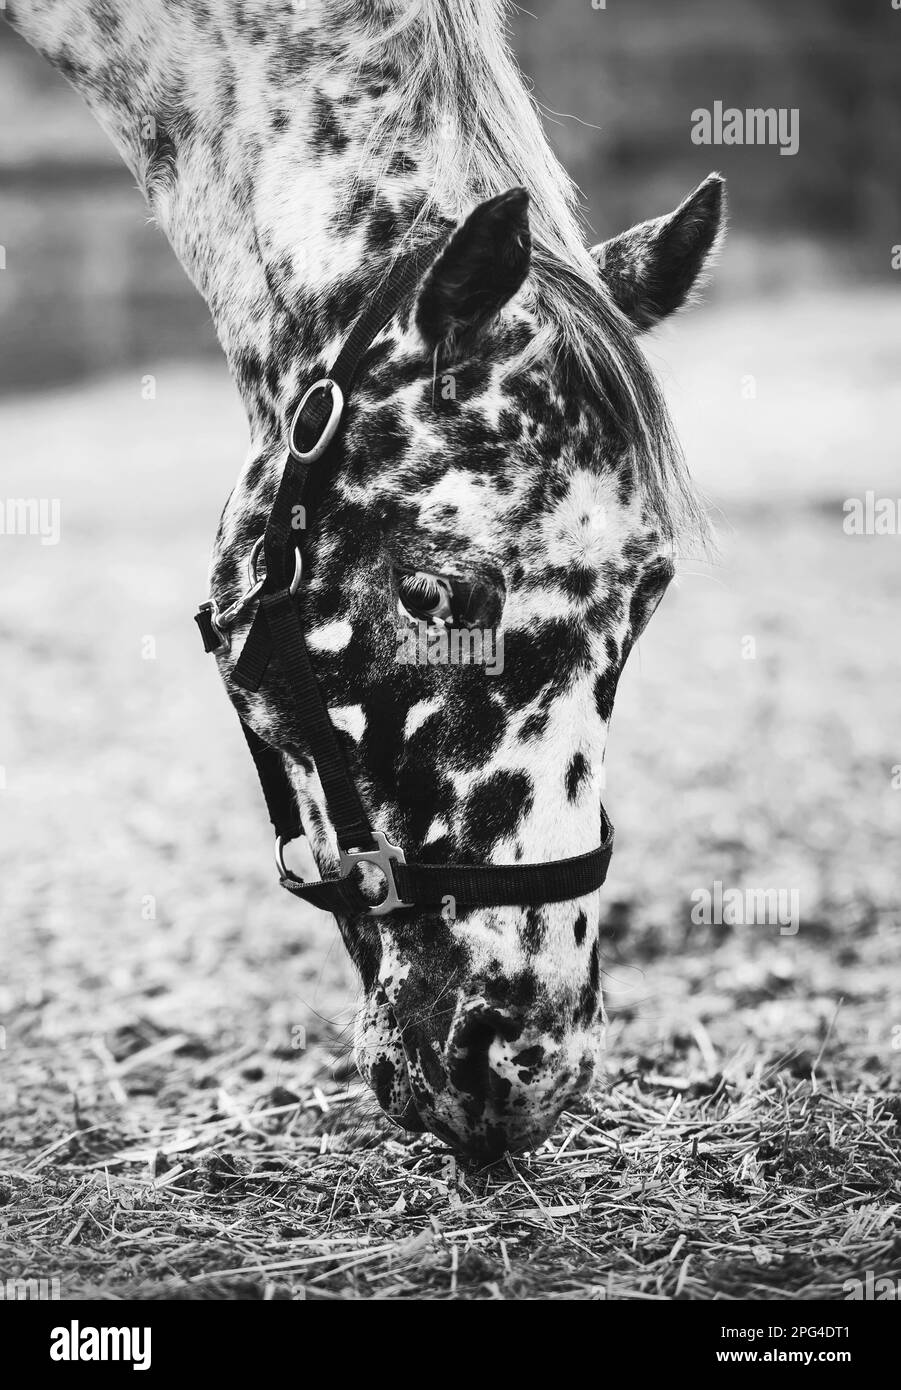 A black and white portrait of a spotted horse eating hay on a farm. Agriculture and livestock. Horse care. Stock Photo